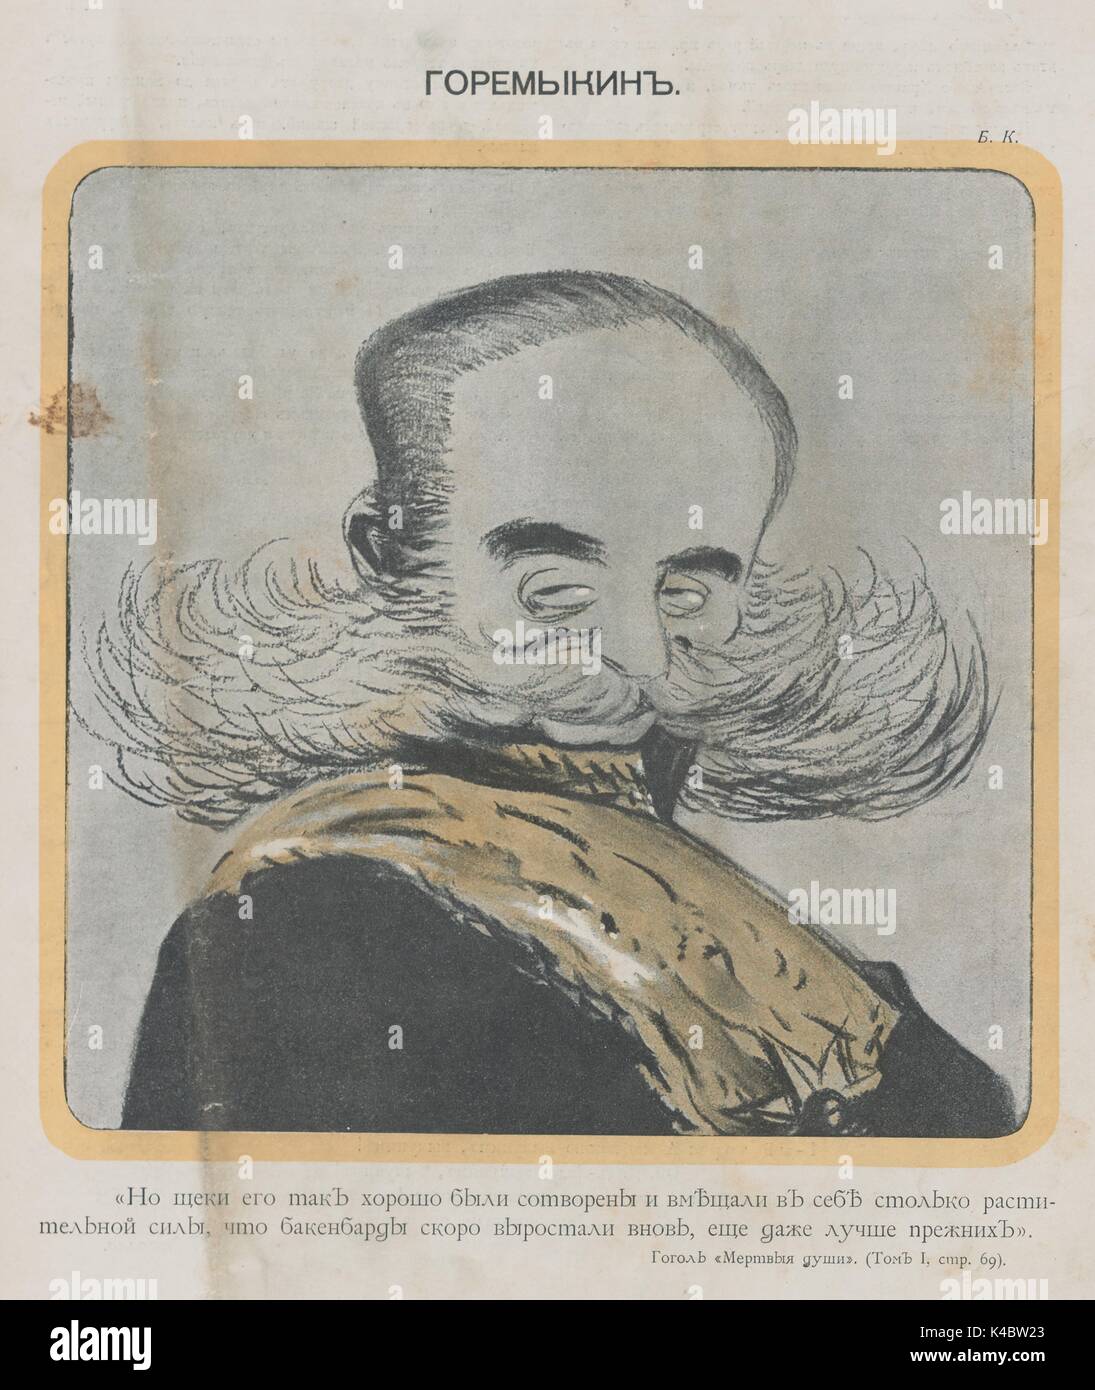 Caricature of Russian conservative politician Ivan Goremykin, showing wildly exaggerated whiskers, from the Russian satirical journal Adskaia Pochta (Infernal Mail), 1906. Stock Photo